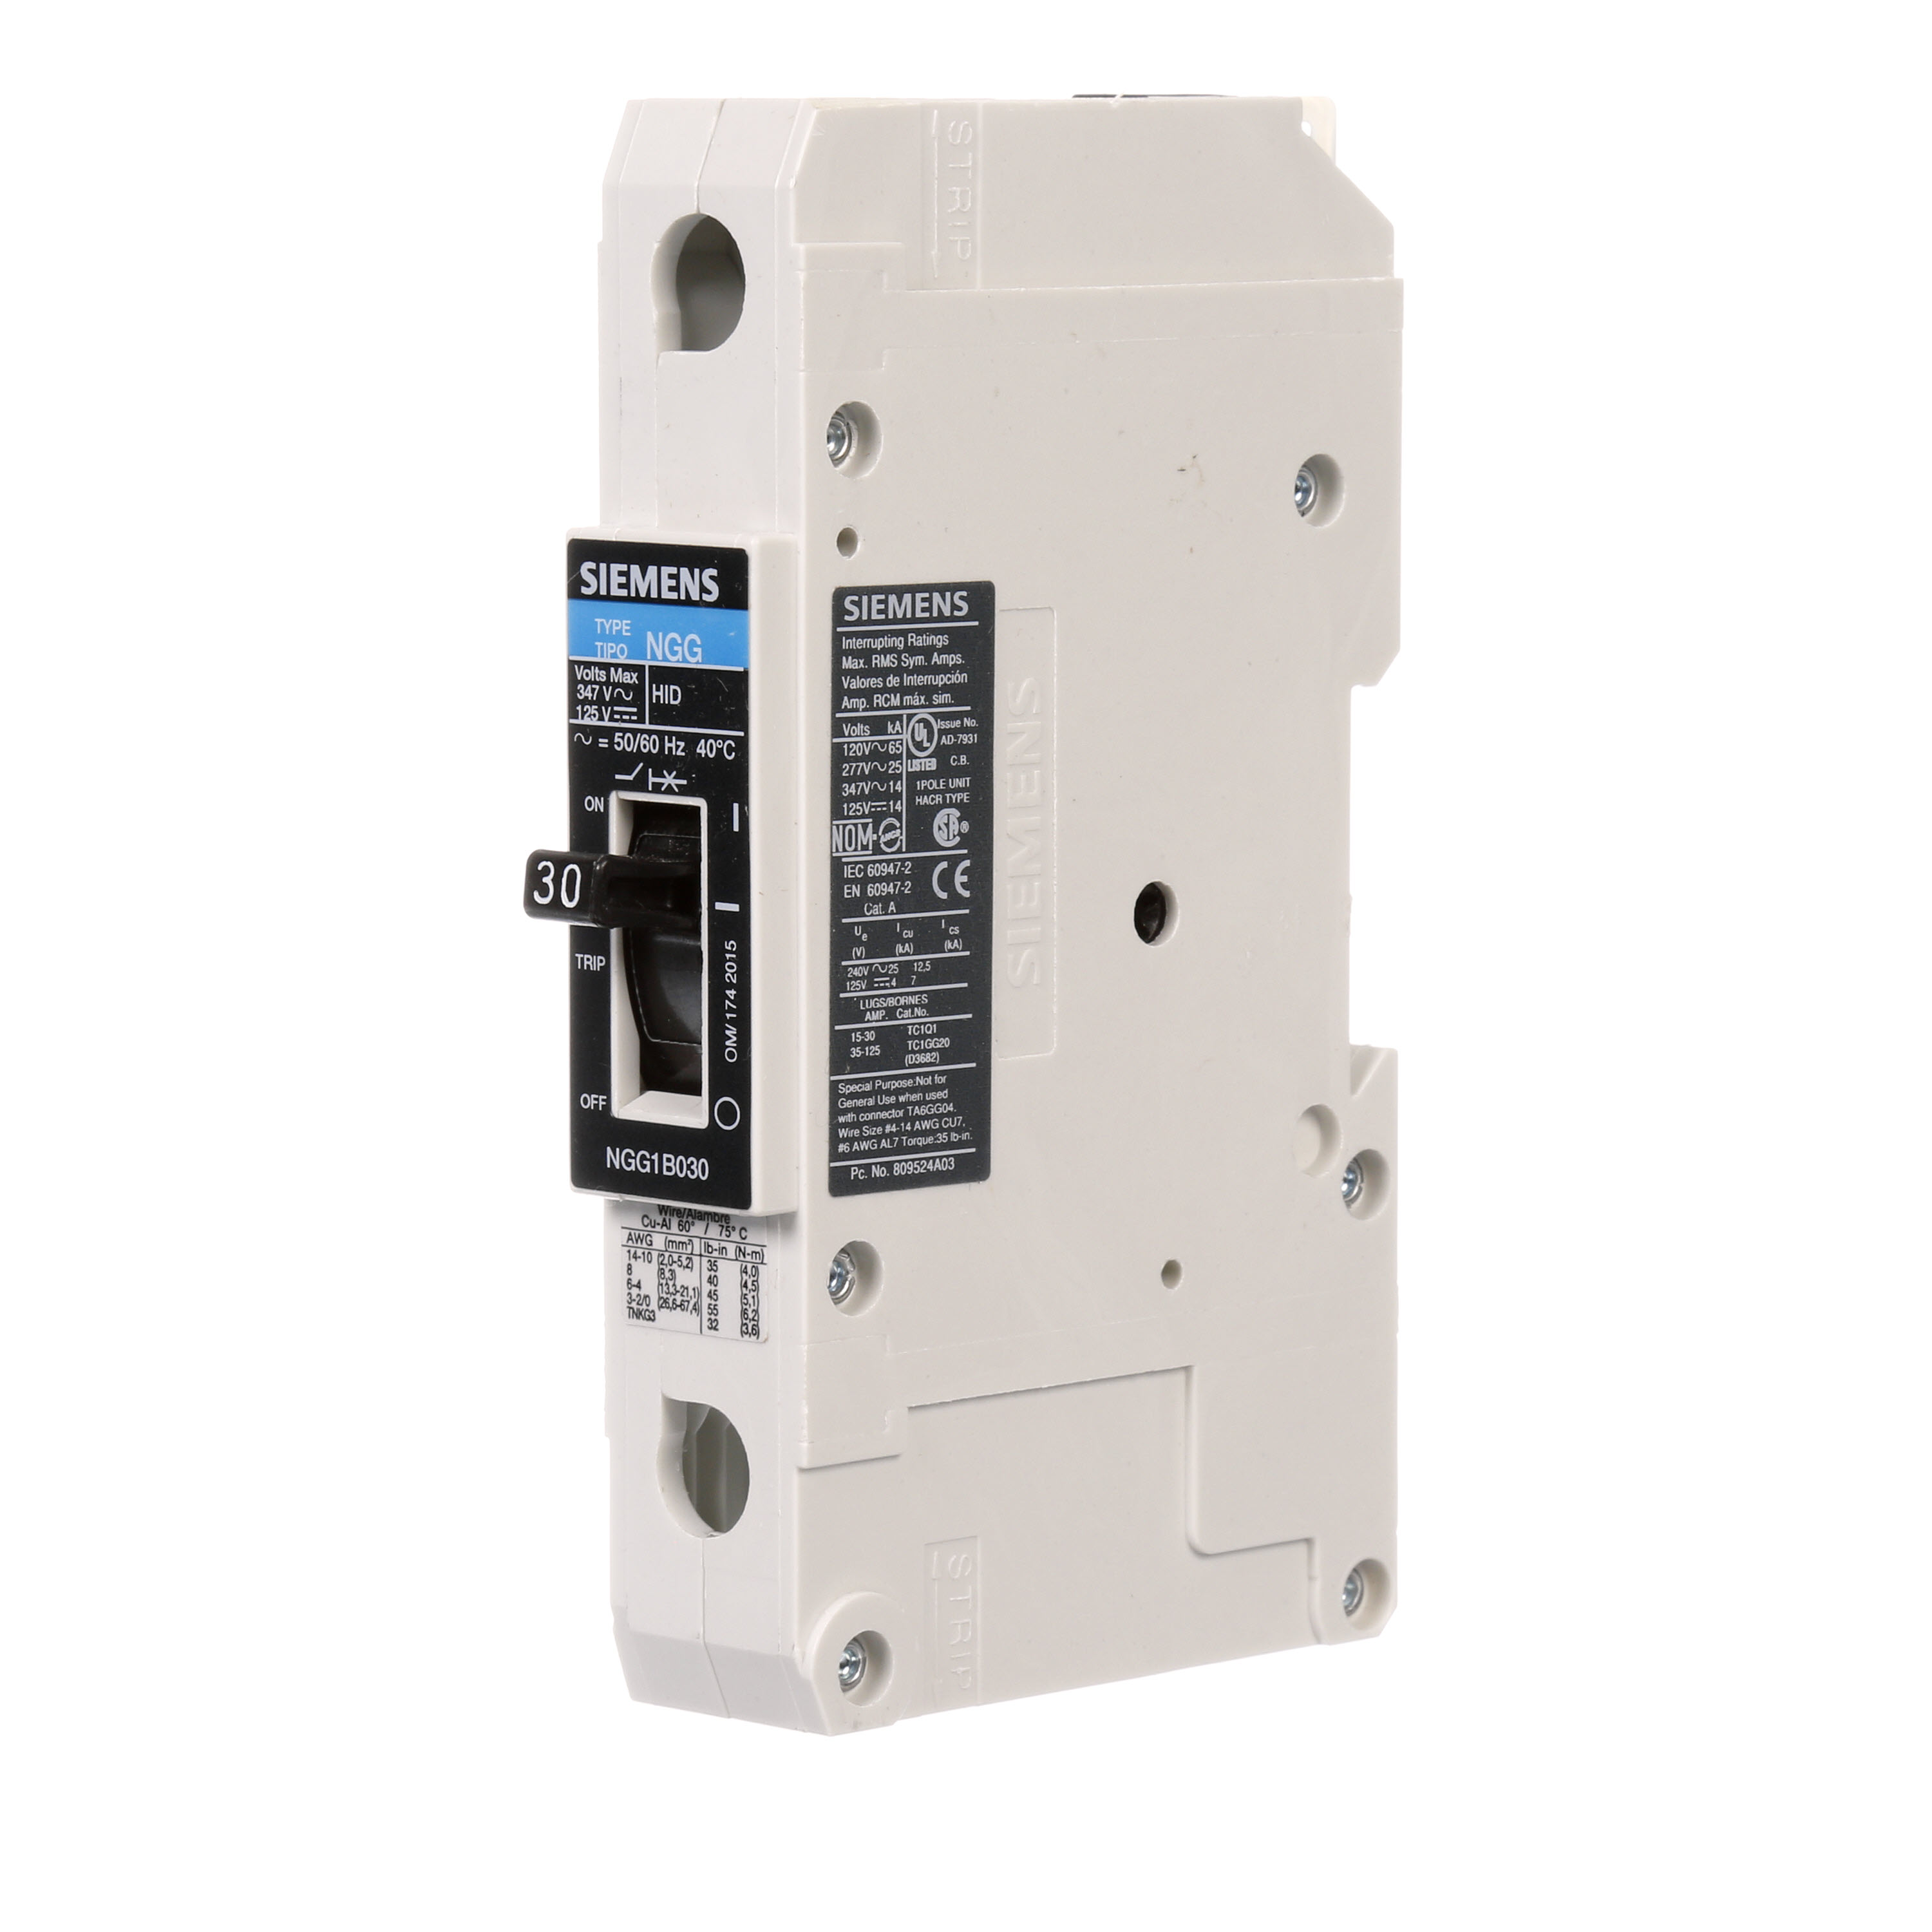 SIEMENS LOW VOLTAGE G FRAME CIRCUIT BREAKER WITH THERMAL - MAGNETIC TRIP. UL LISTED NGG FRAME WITH STANDARD BREAKING CAPACITY. 30A 1-POLE (14KAIC AT 347V) (25KAIC AT 277V). SPECIAL FEATURES MOUNTS ON DIN RAIL / SCREW, LINE AND LOAD SIDE LUGS (TC1Q1) WIRE RANGE 14 - 10 AWS (CU/AL). DIMENSIONS (W x H x D) IN 1 x 5.4 x 2.8.